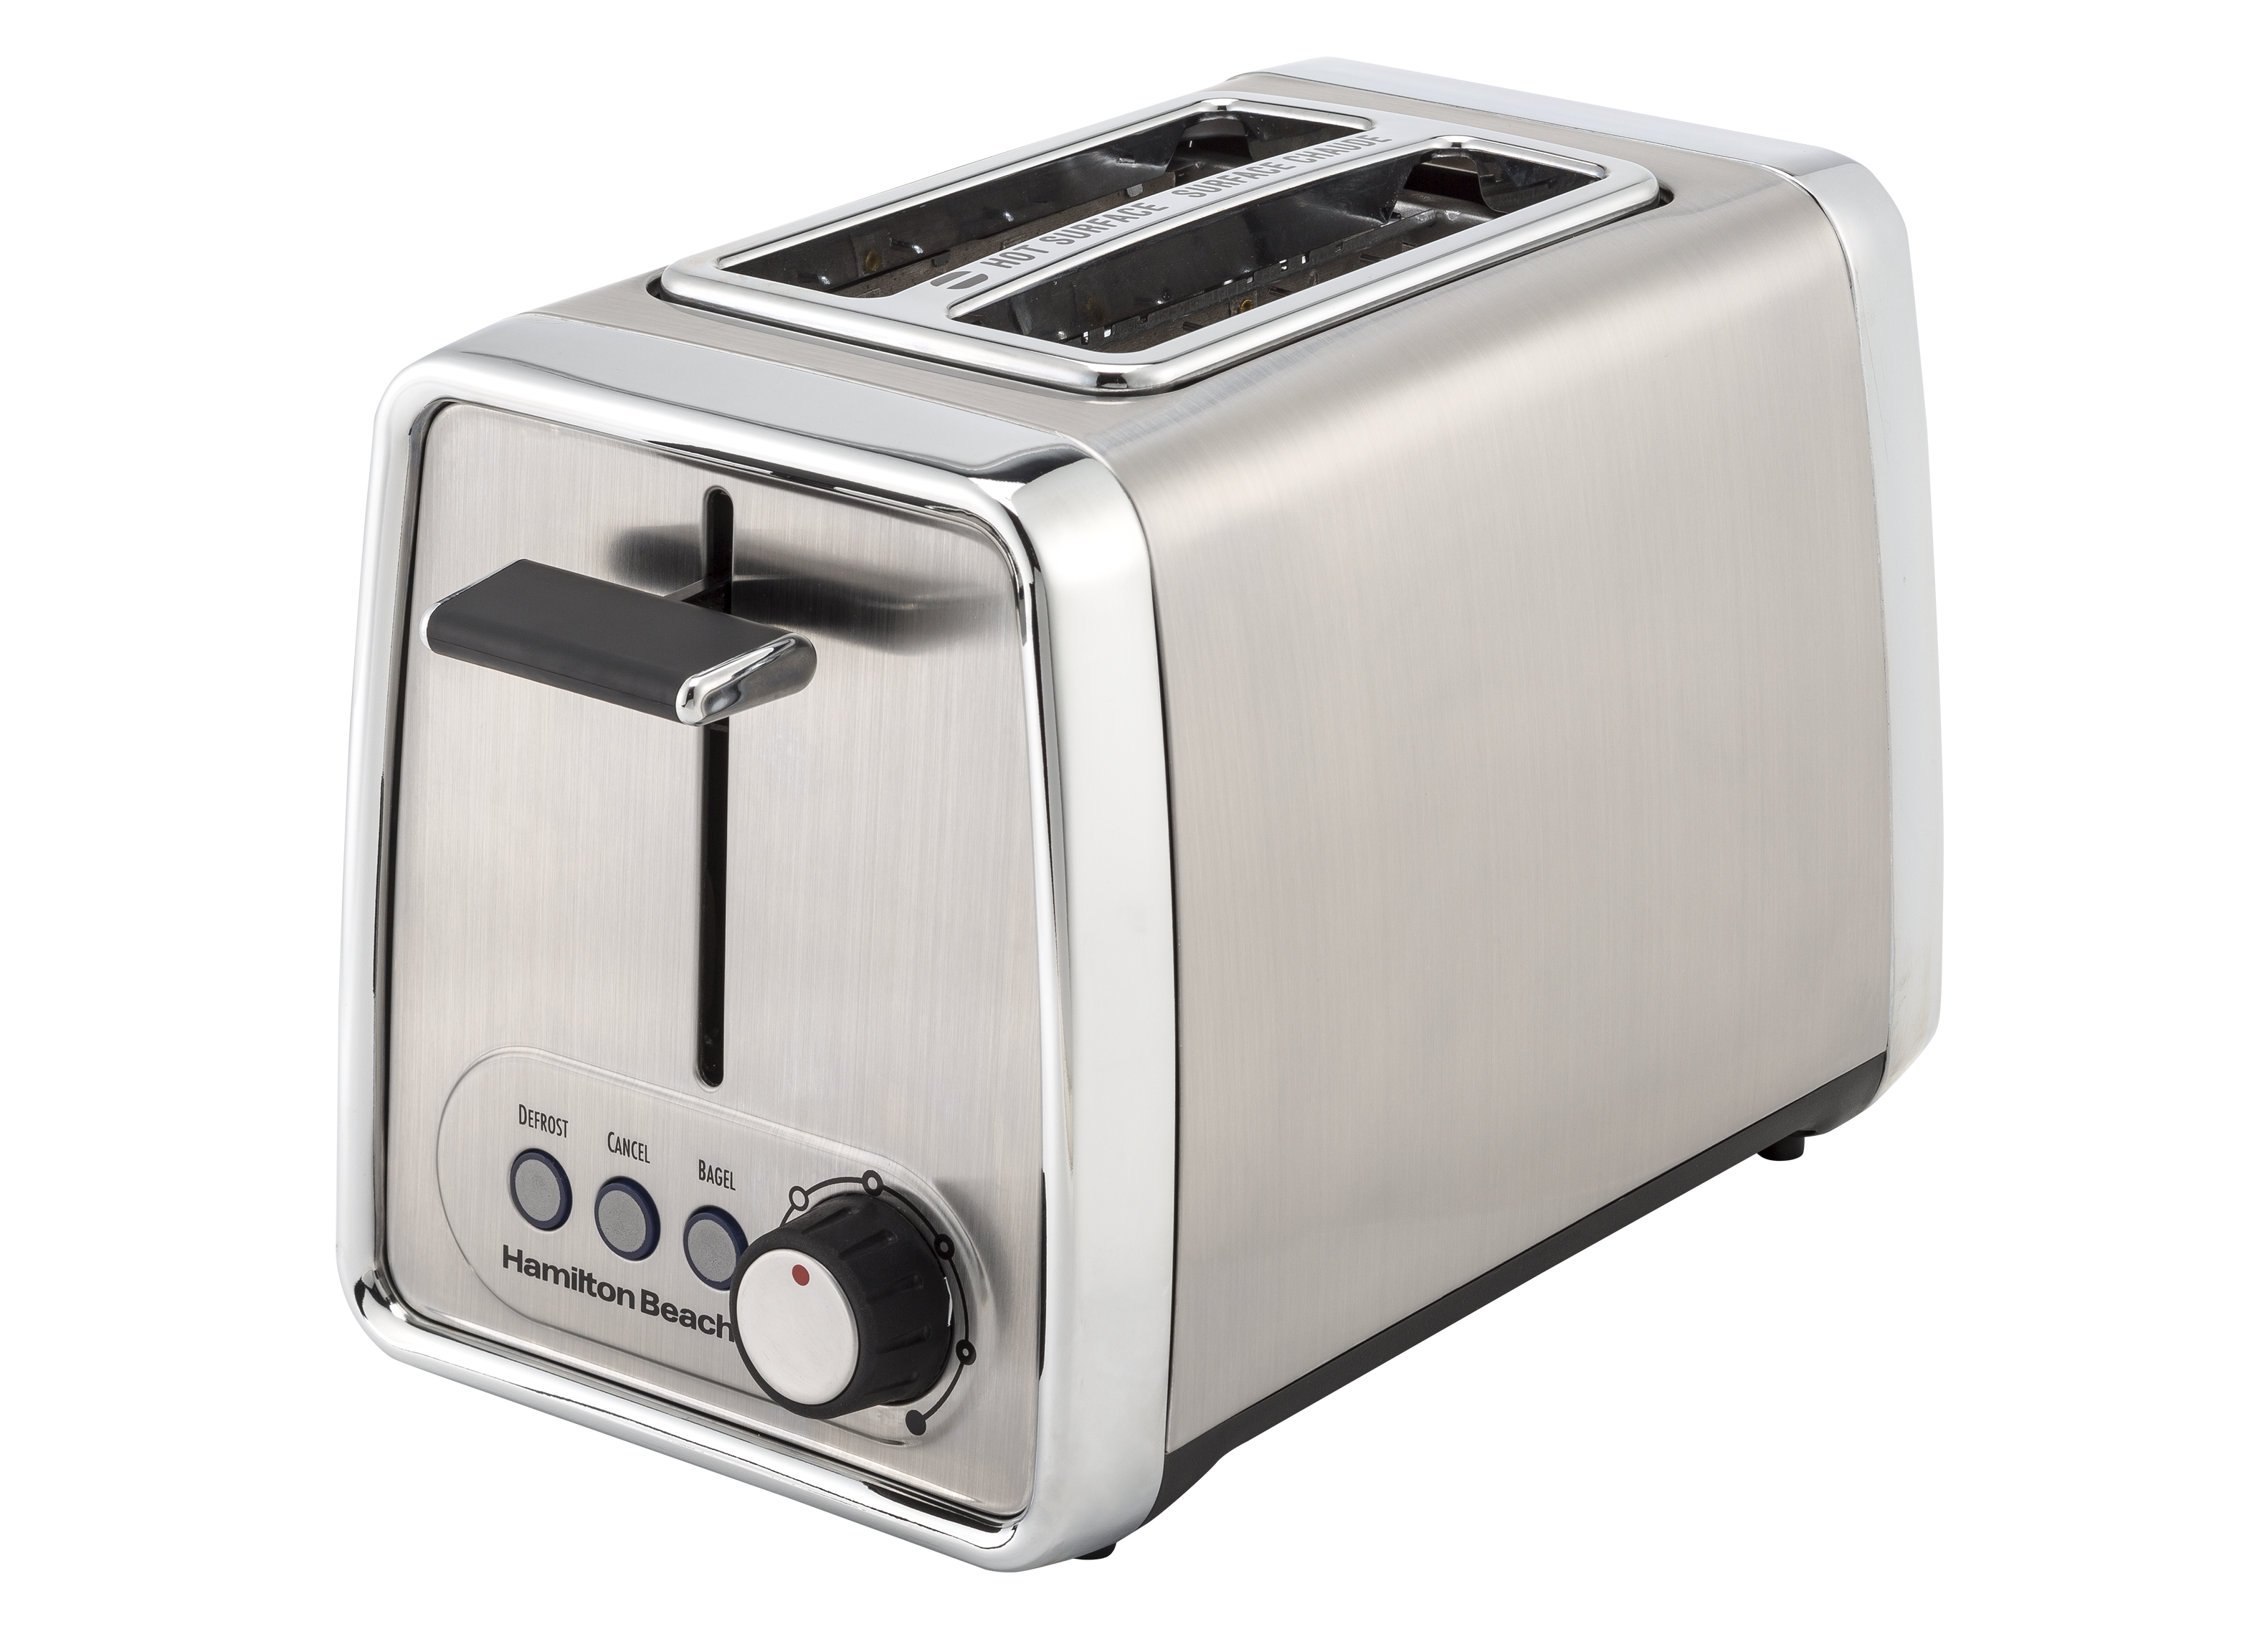 https://crdms.images.consumerreports.org/prod/products/cr/models/387670-toasters-hamiltonbeach-modernchrome227912slice.png